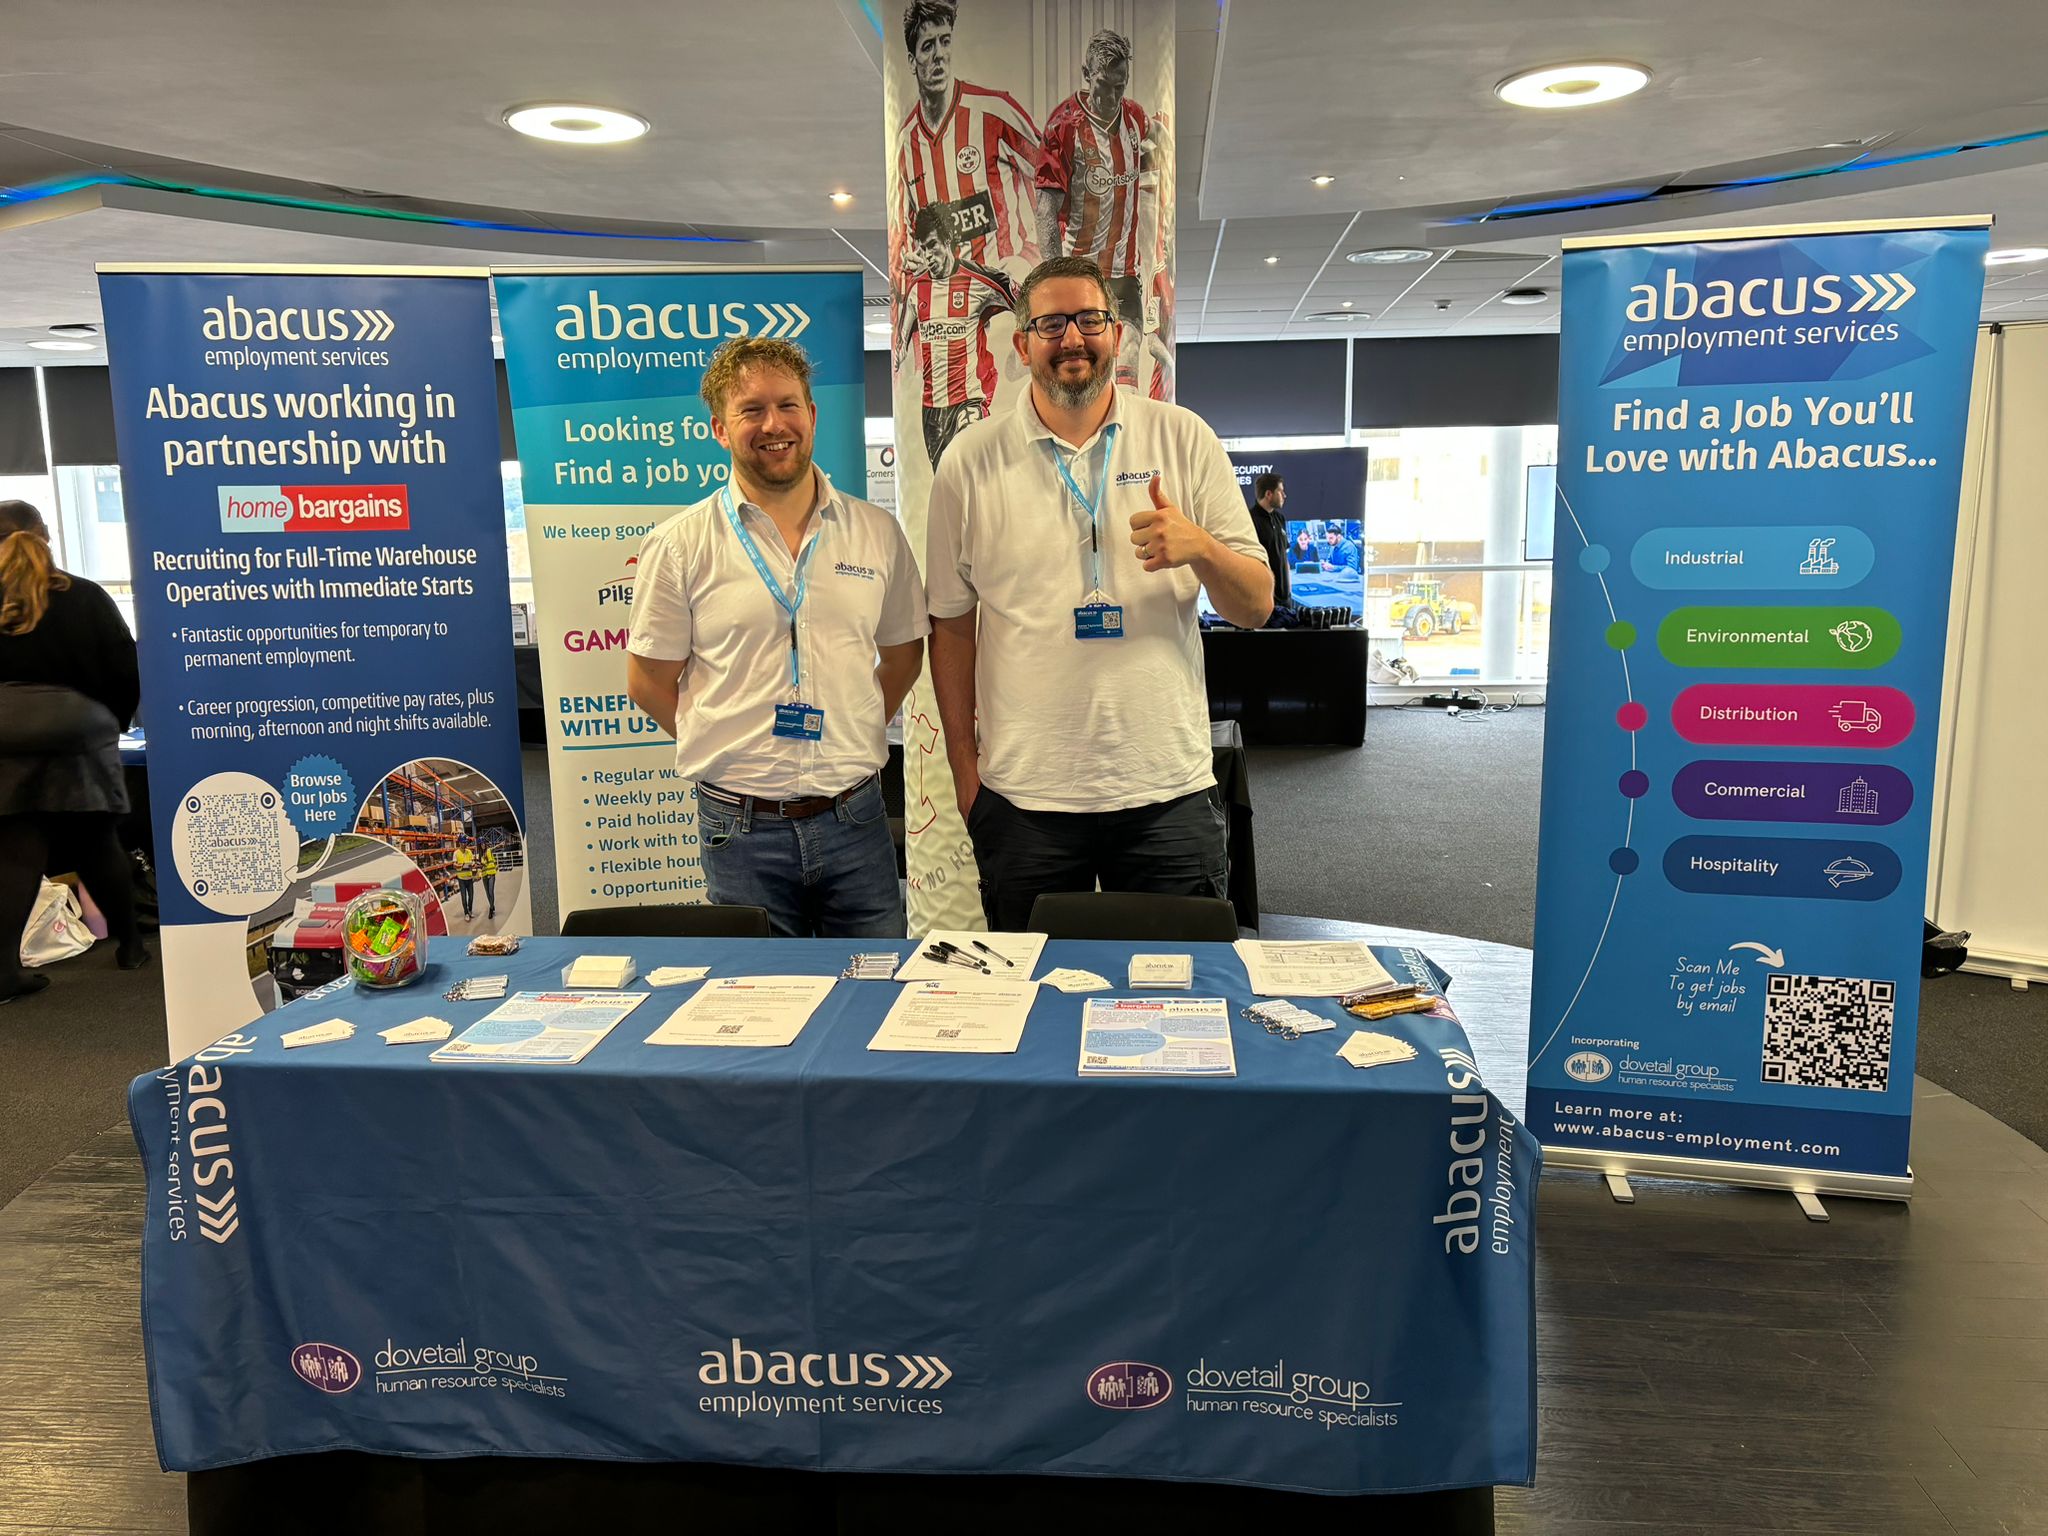 Abacus Employment Services at our event in Southampton